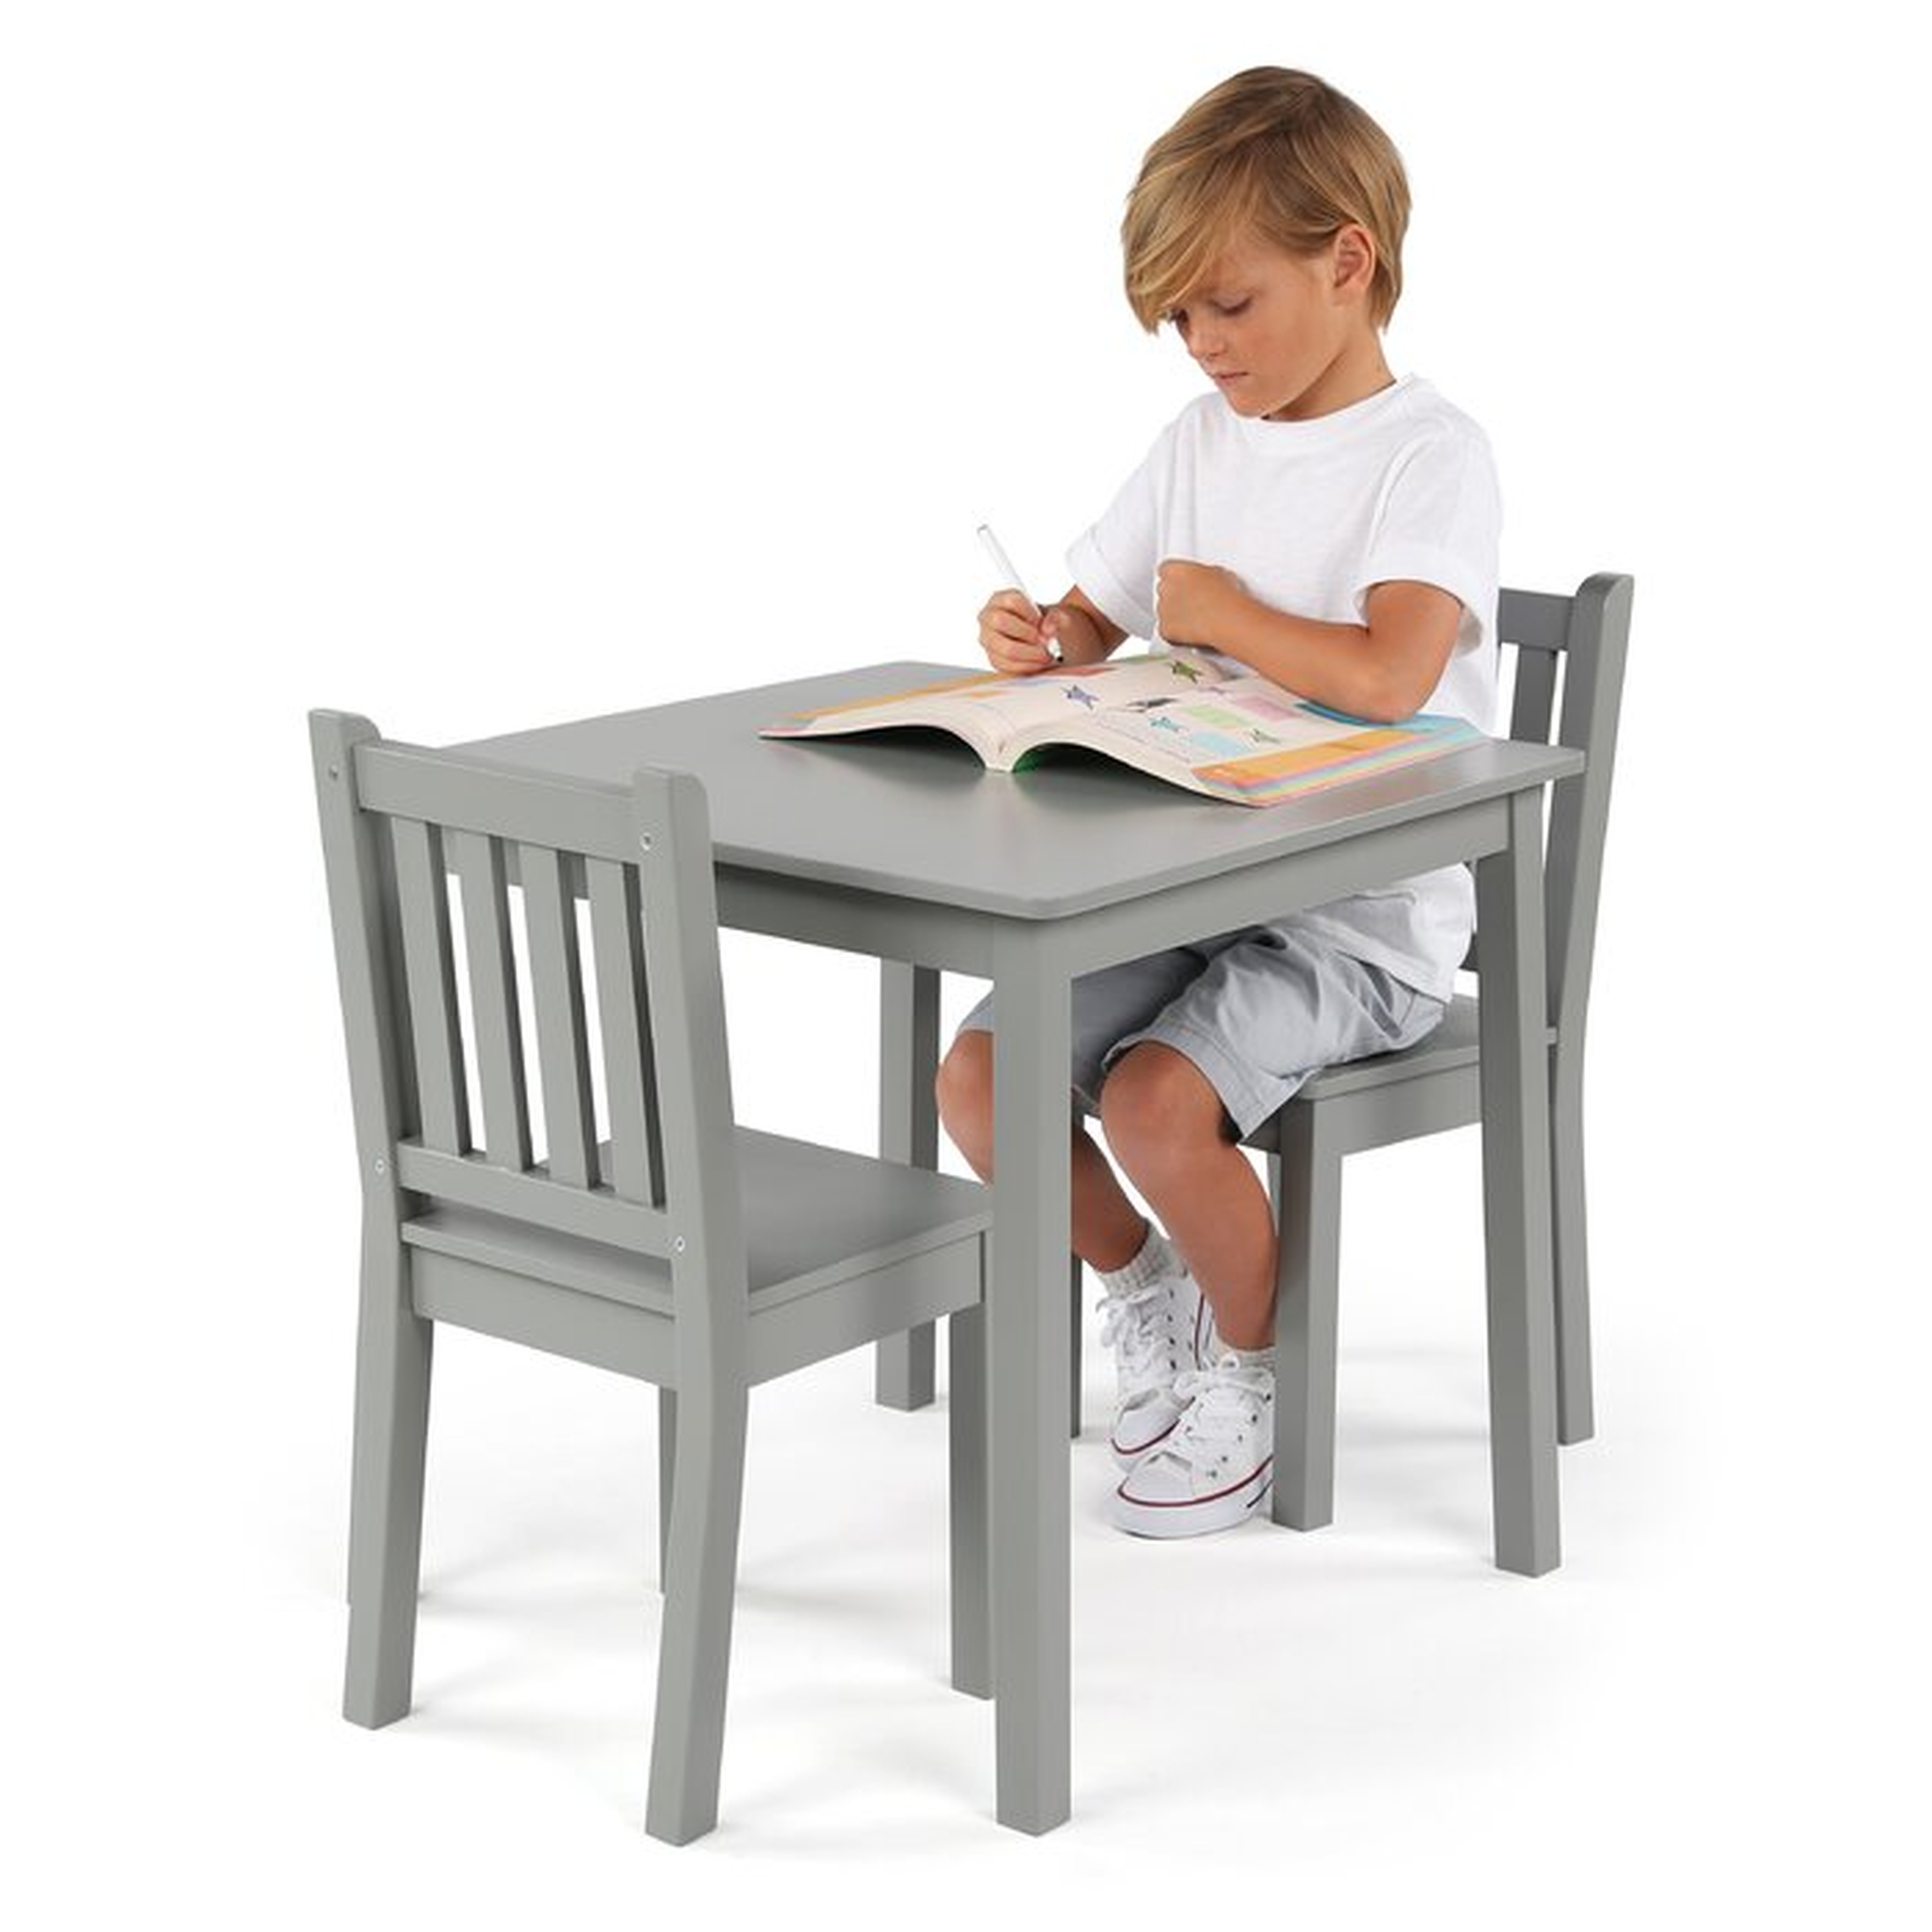 Albertville Kids 3 Piece Square Writing Table and Chair Set - Wayfair